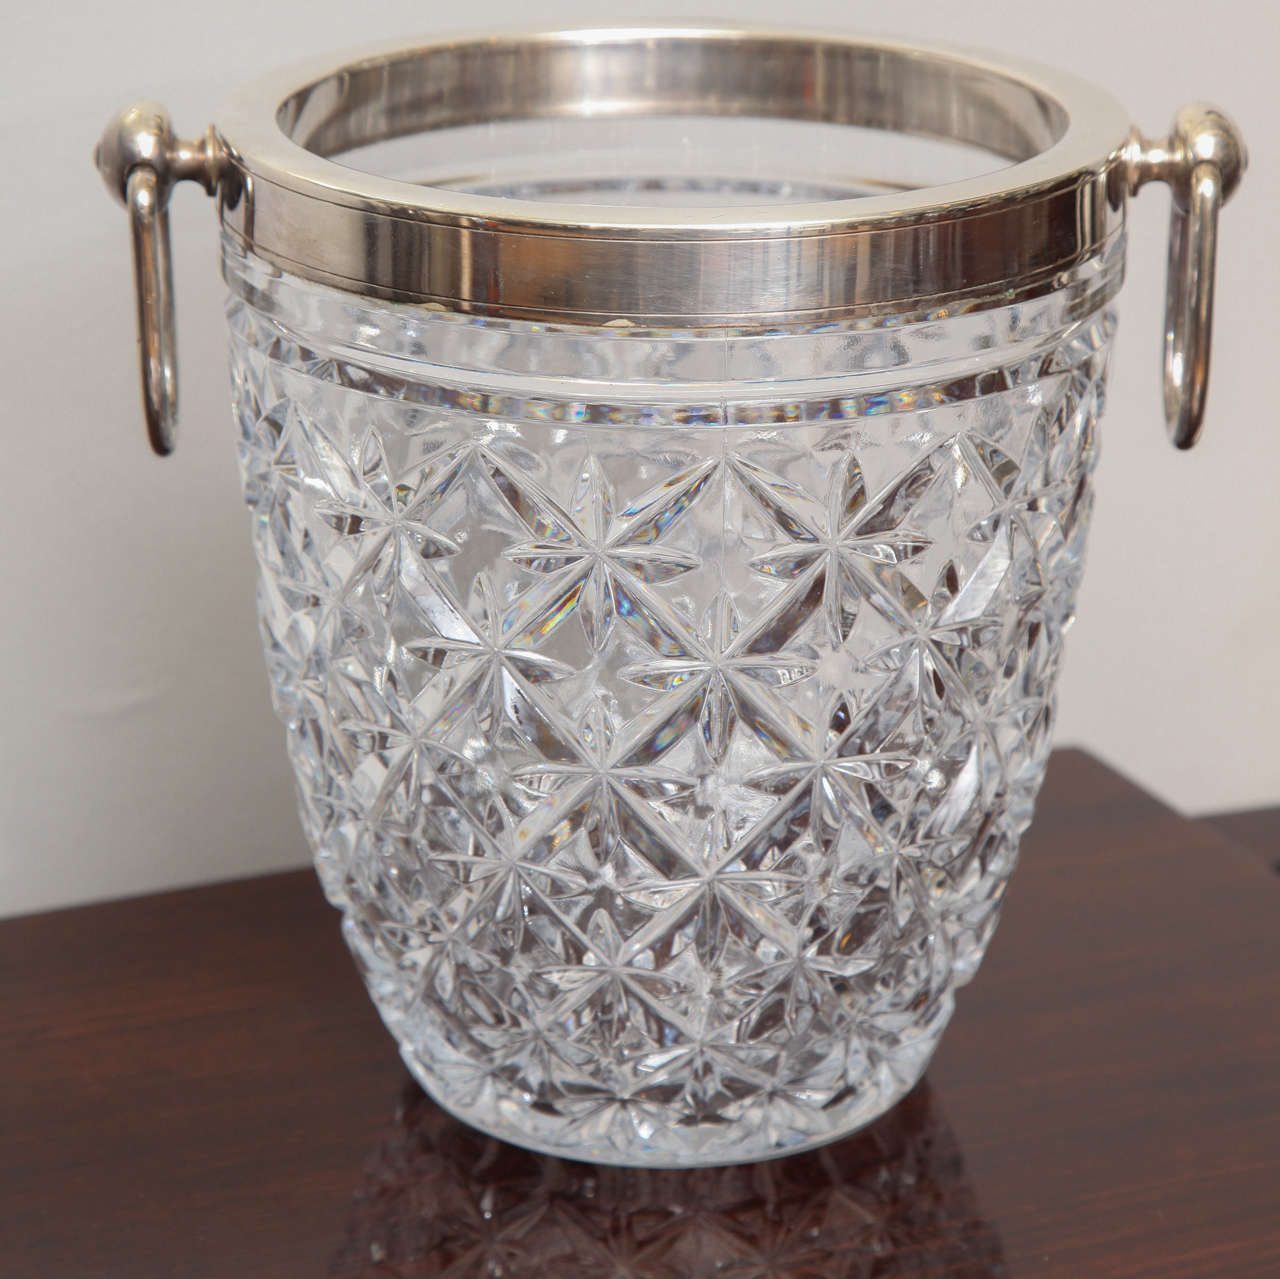 Elegant Cut crystal Champagne cooler with silver plated lip and handles.